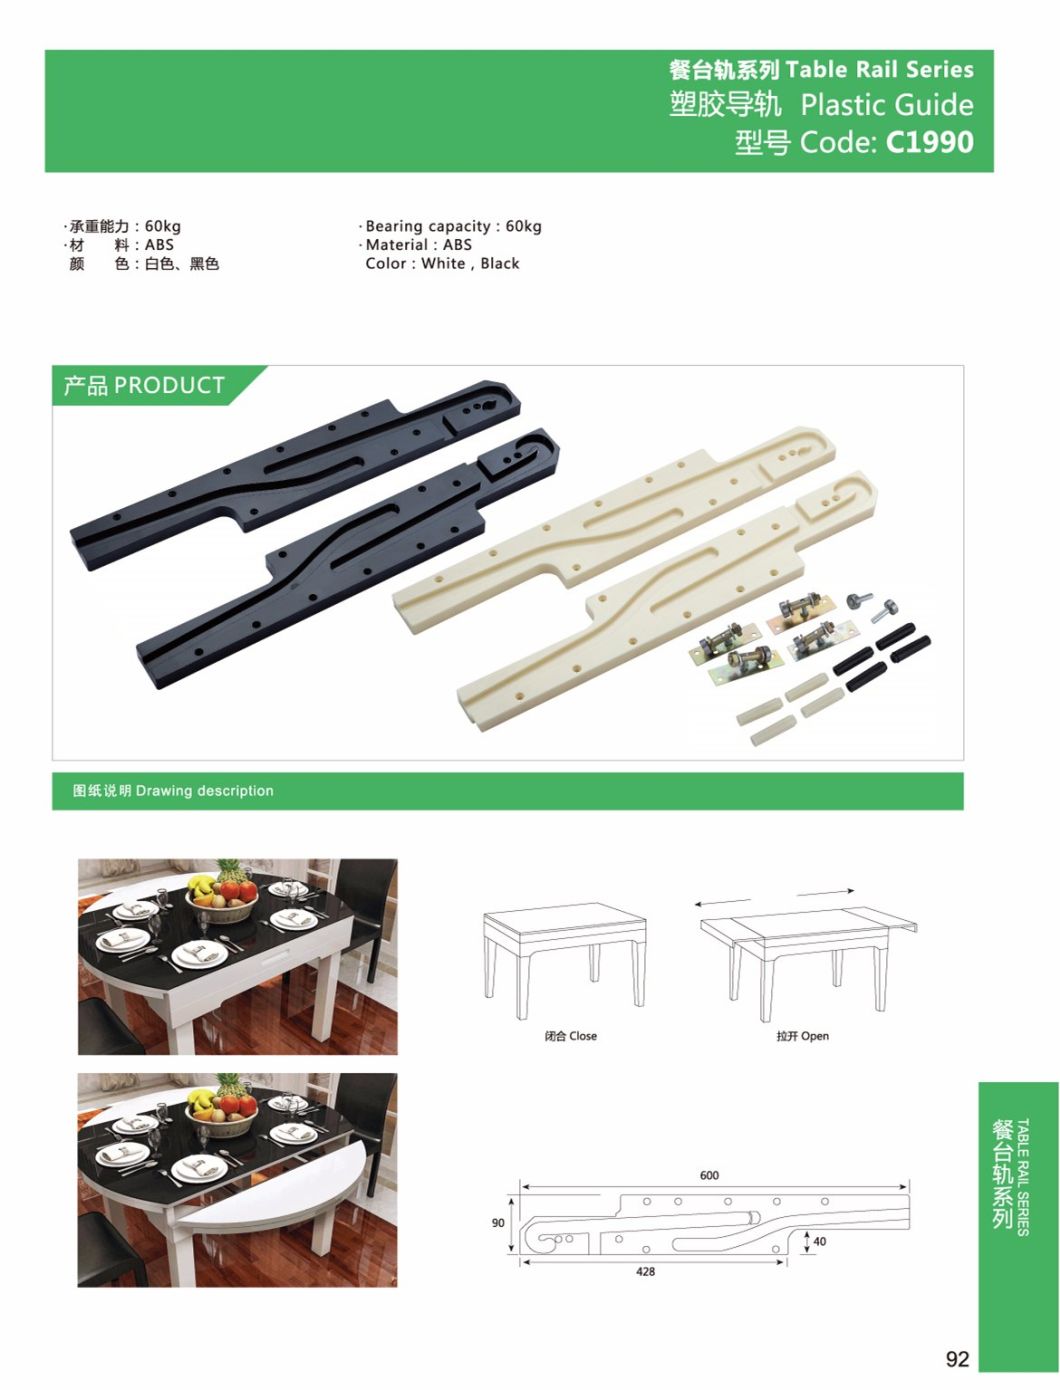 Plastic Table Rails/Table Slides with Wheels